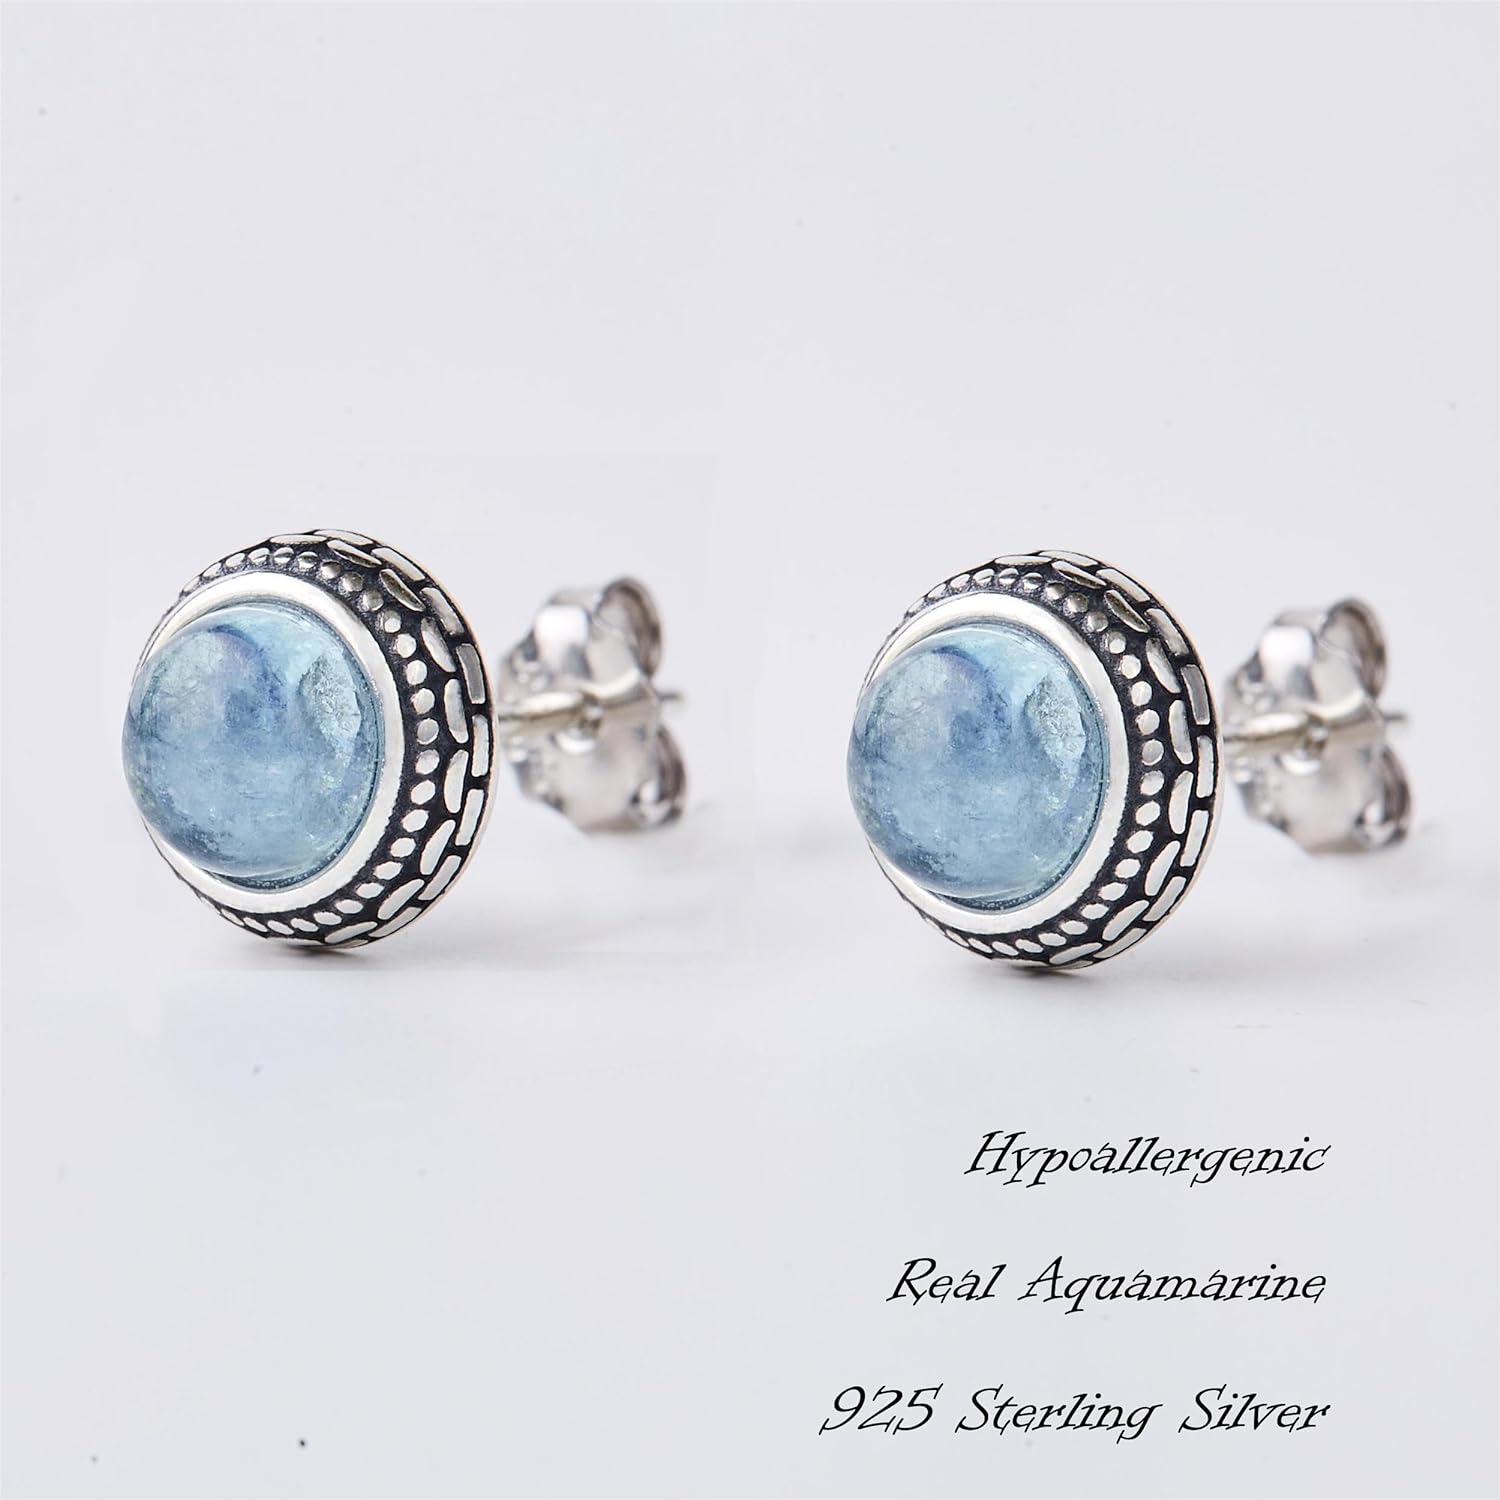 Small Genuine Blue Aquamarine 925 Sterling Silver Hypoallergenic Studs Earrings Jewelry for Women Dainty Trendy Antiqued Silver March Birthstone Earrings Jewelry Gifts for Women and Girls Her Keenove